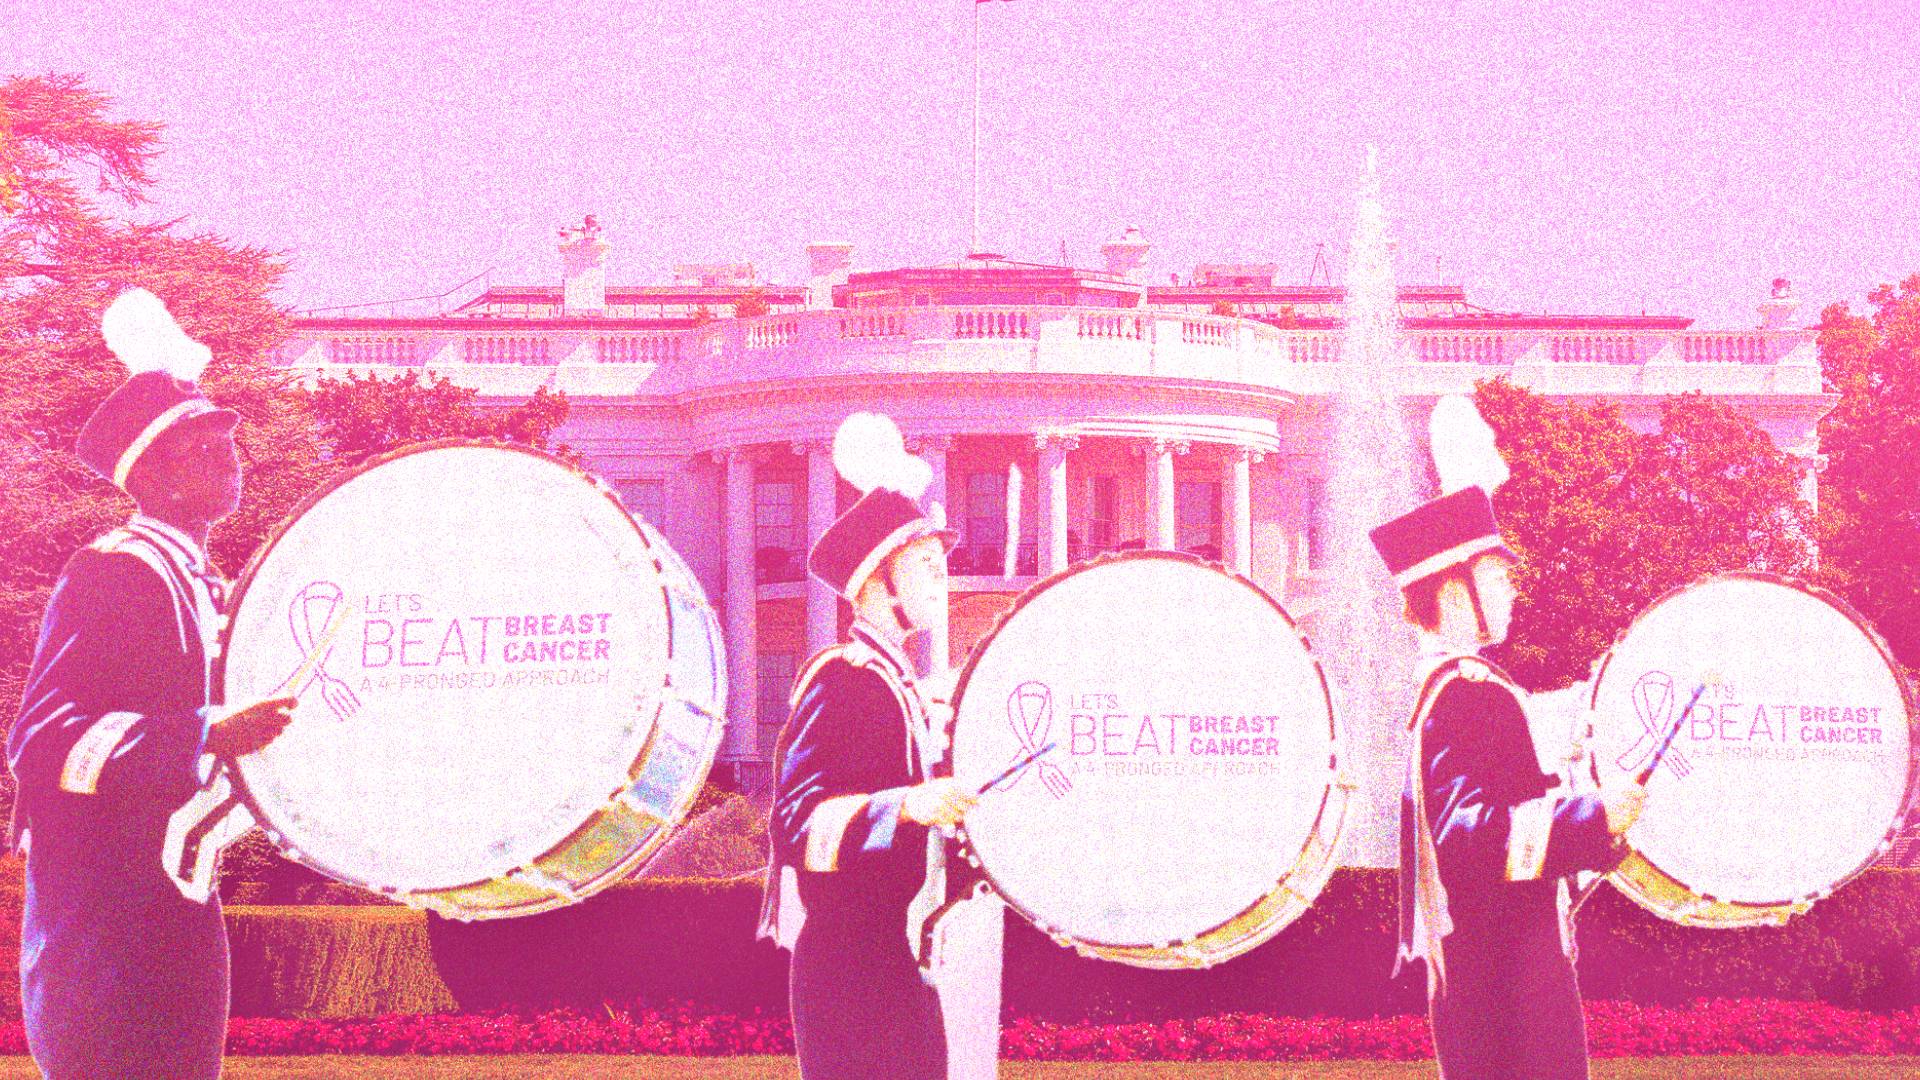 Doctors Group Plans “Let’s Beat (the Drum for) Breast Cancer” Rally in Front of White House